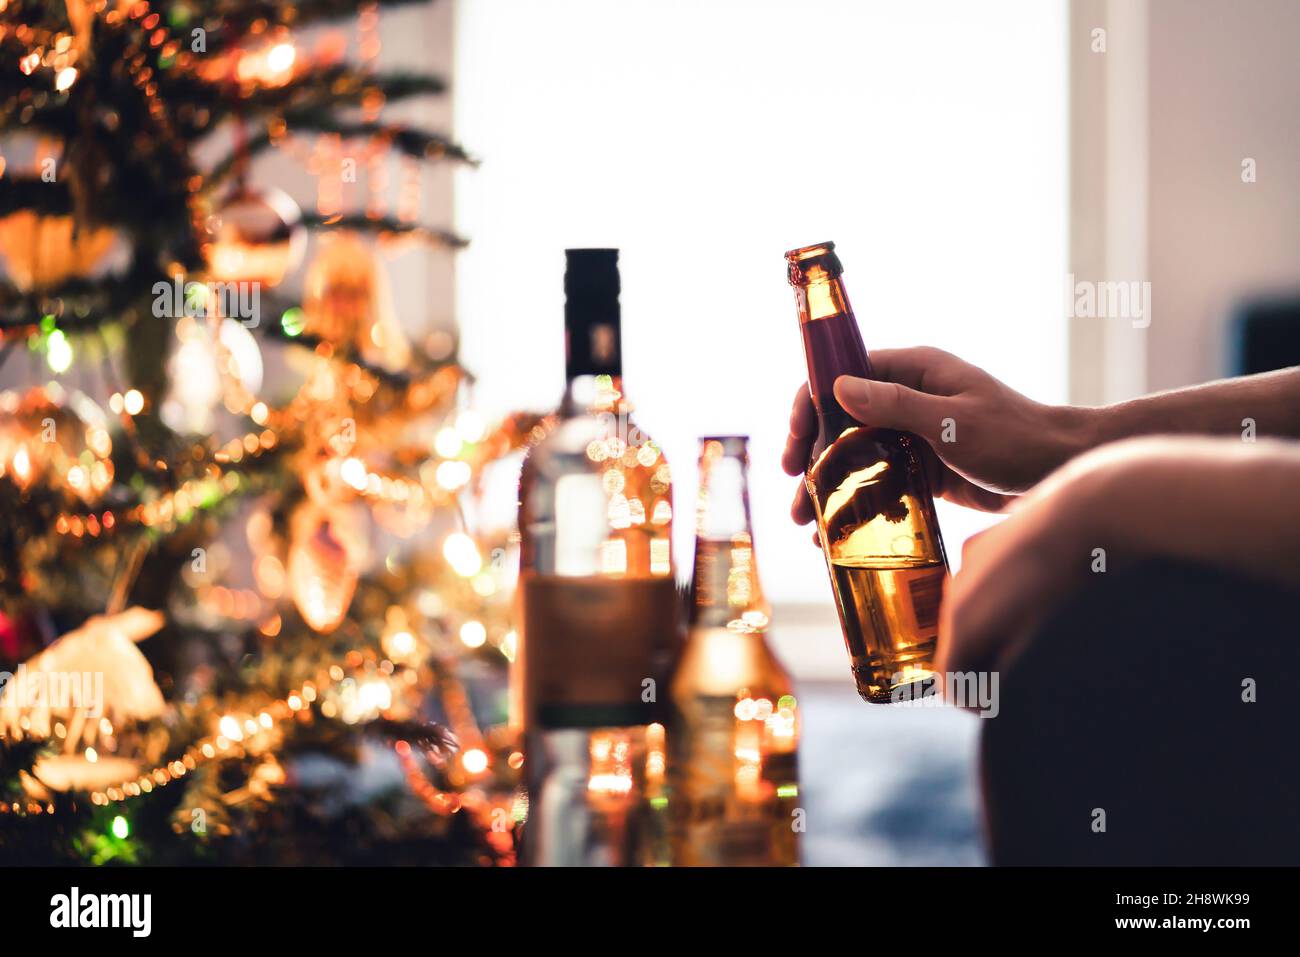 Christmas party with alcohol bottles. New year's celebration. Beer, wine and vodka. Festive Xmas tree. Alcoholism and drinking problem concept. Stock Photo